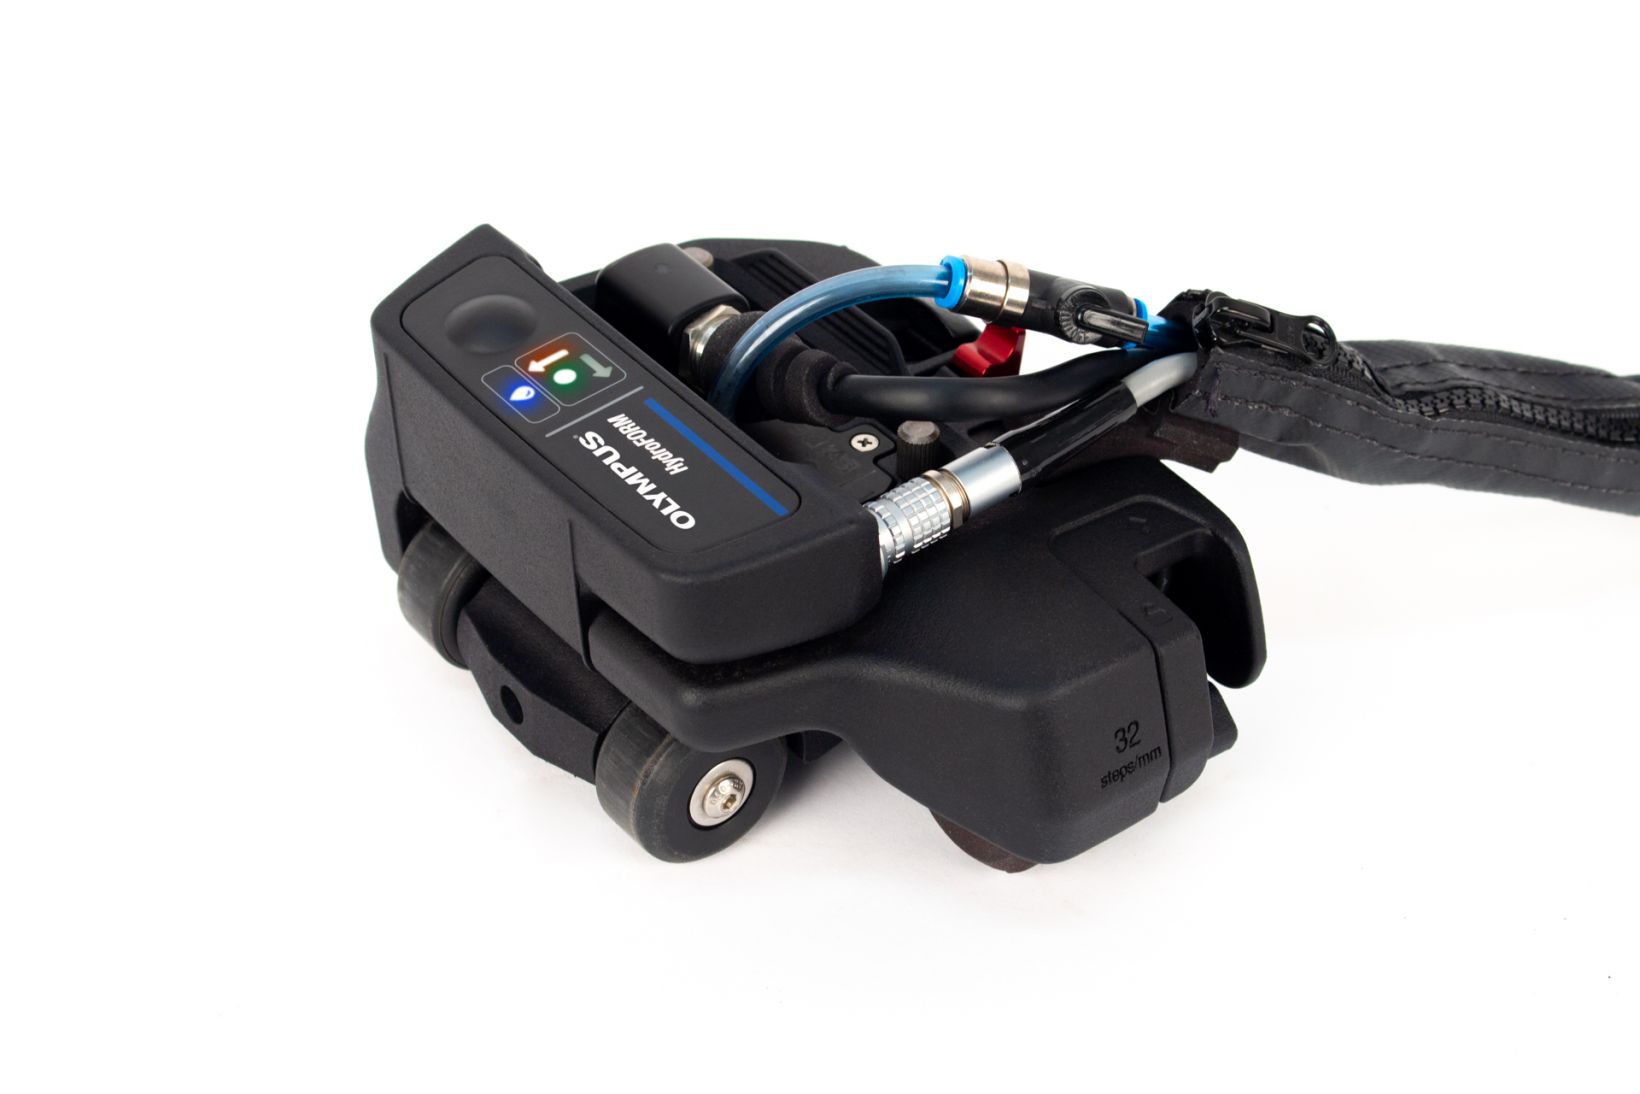 New HydroFORM scanner with ScanDeck LEDs and control button to activate OmniScan X3